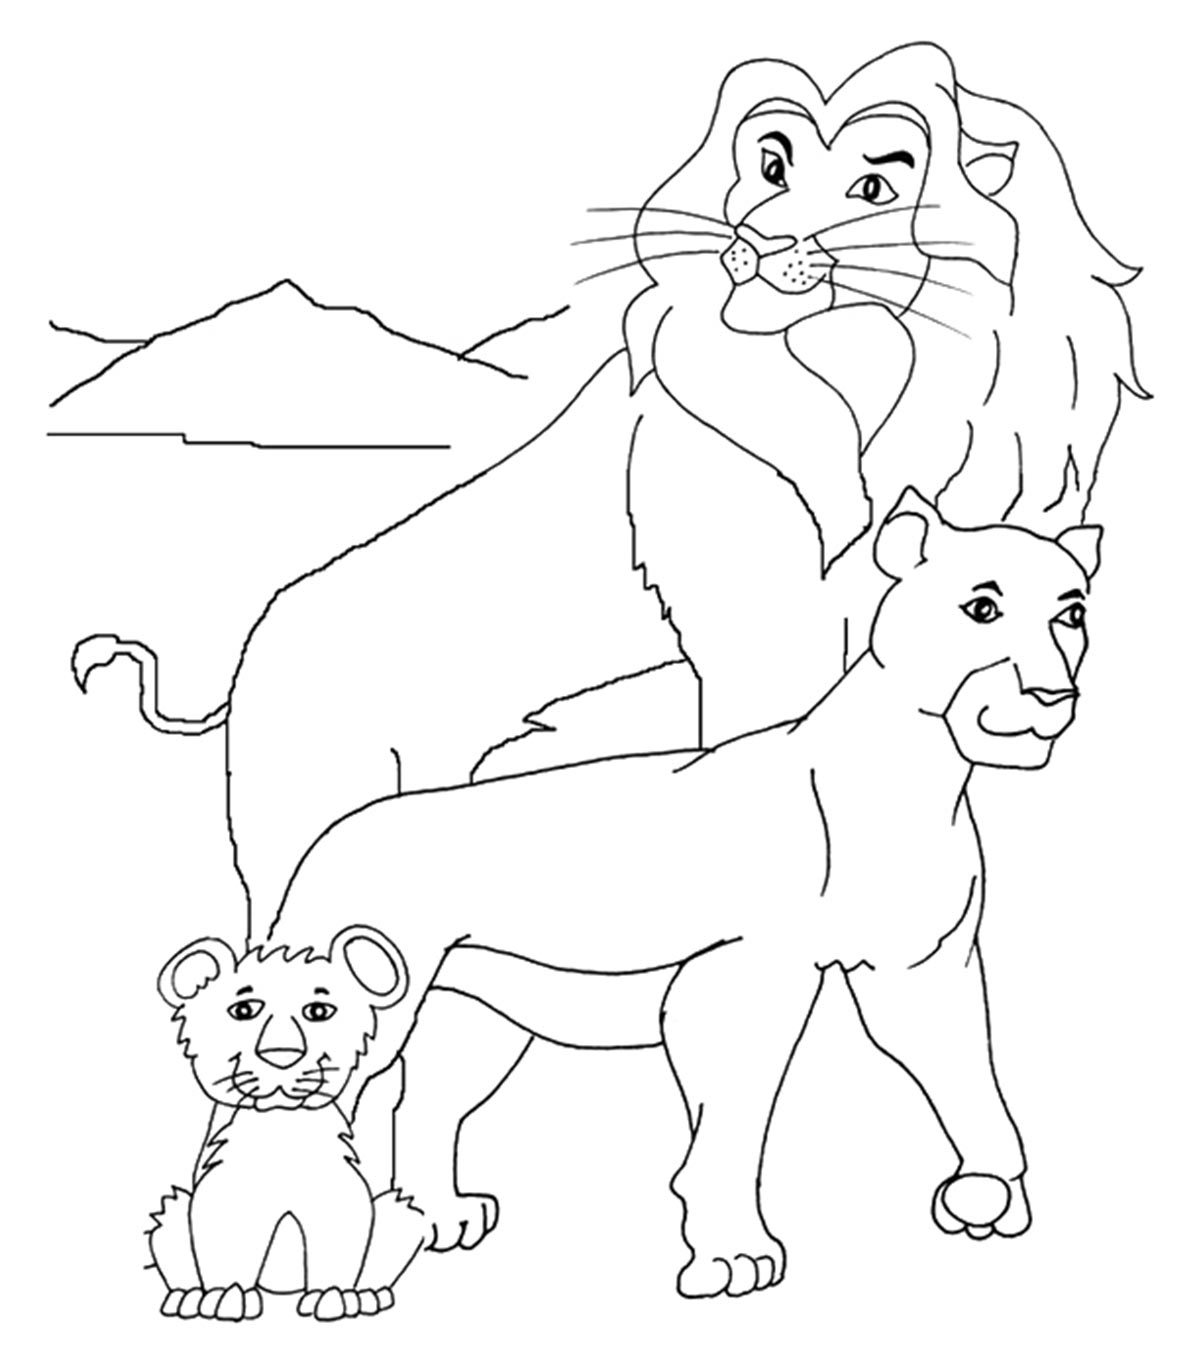 Top 20 Lion Coloring Pages Your Boys Will Love To Color_image